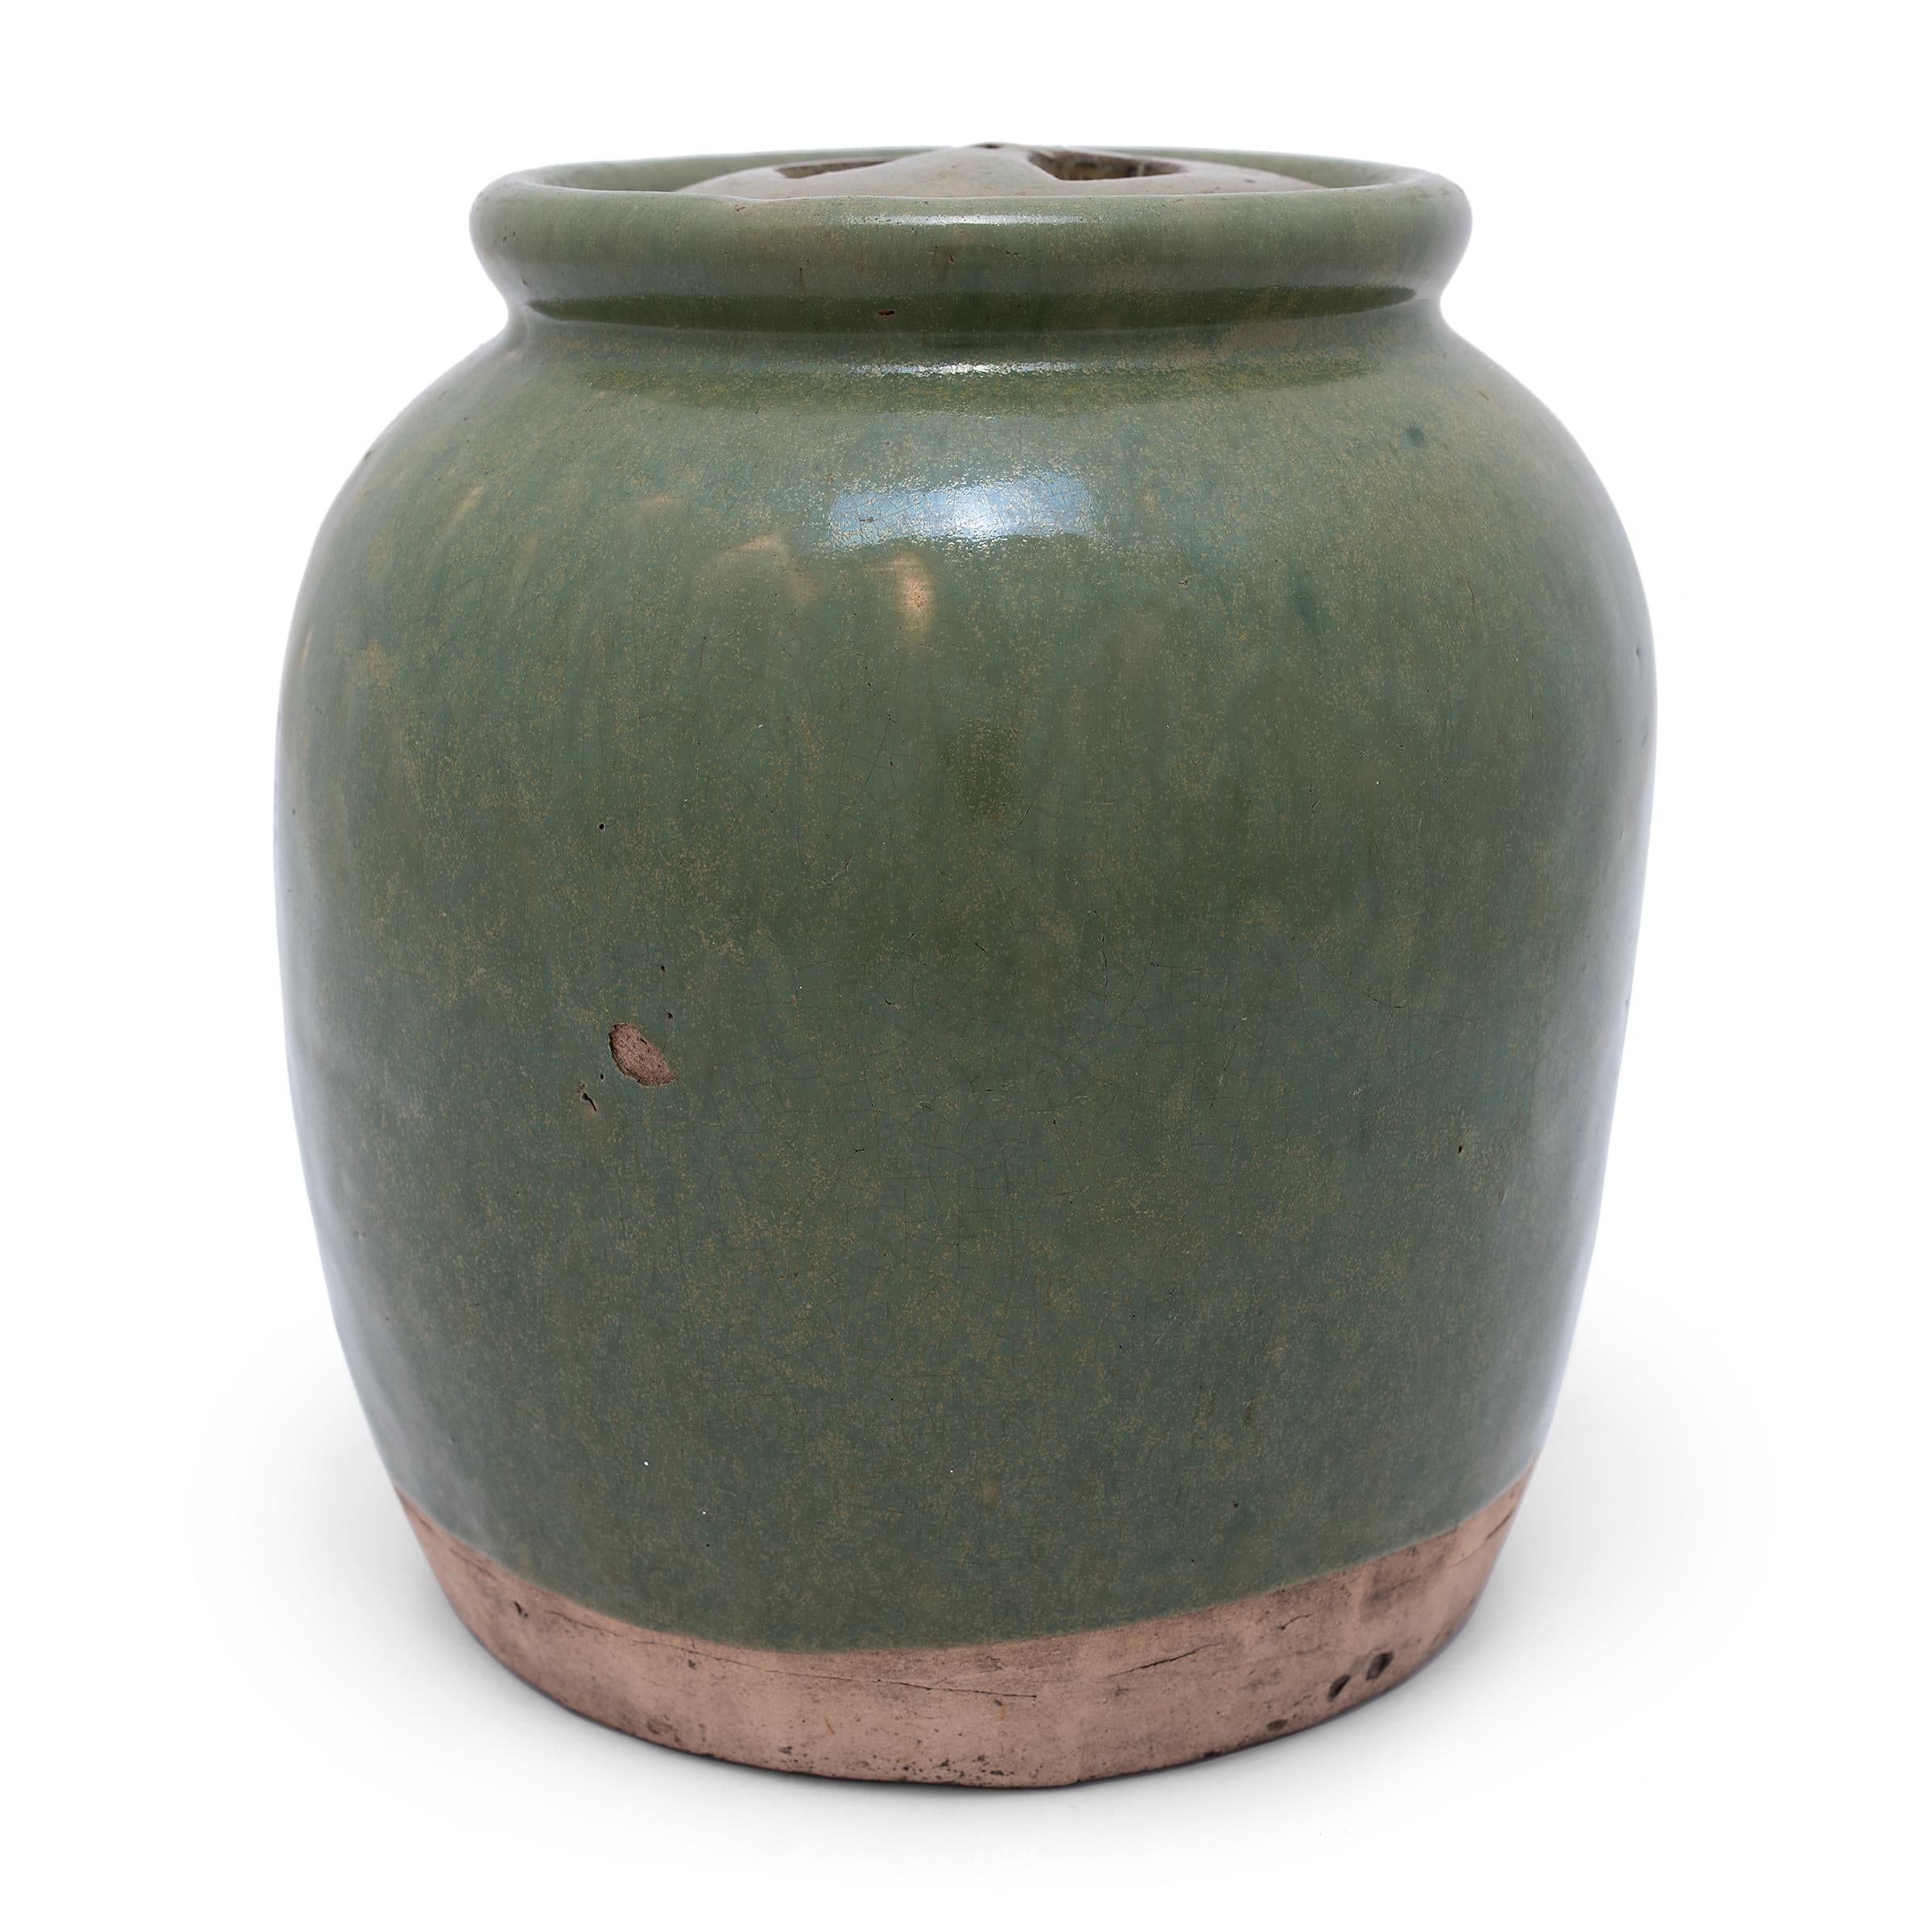 Based on forms used for pickling foods, this glazed ceramic jar has an elongated form, with high shoulders, a rounded lip, and a lid with two cutout handles. A celadon blue-green glaze sheets cloaks the exterior with beautiful irregularity, textured